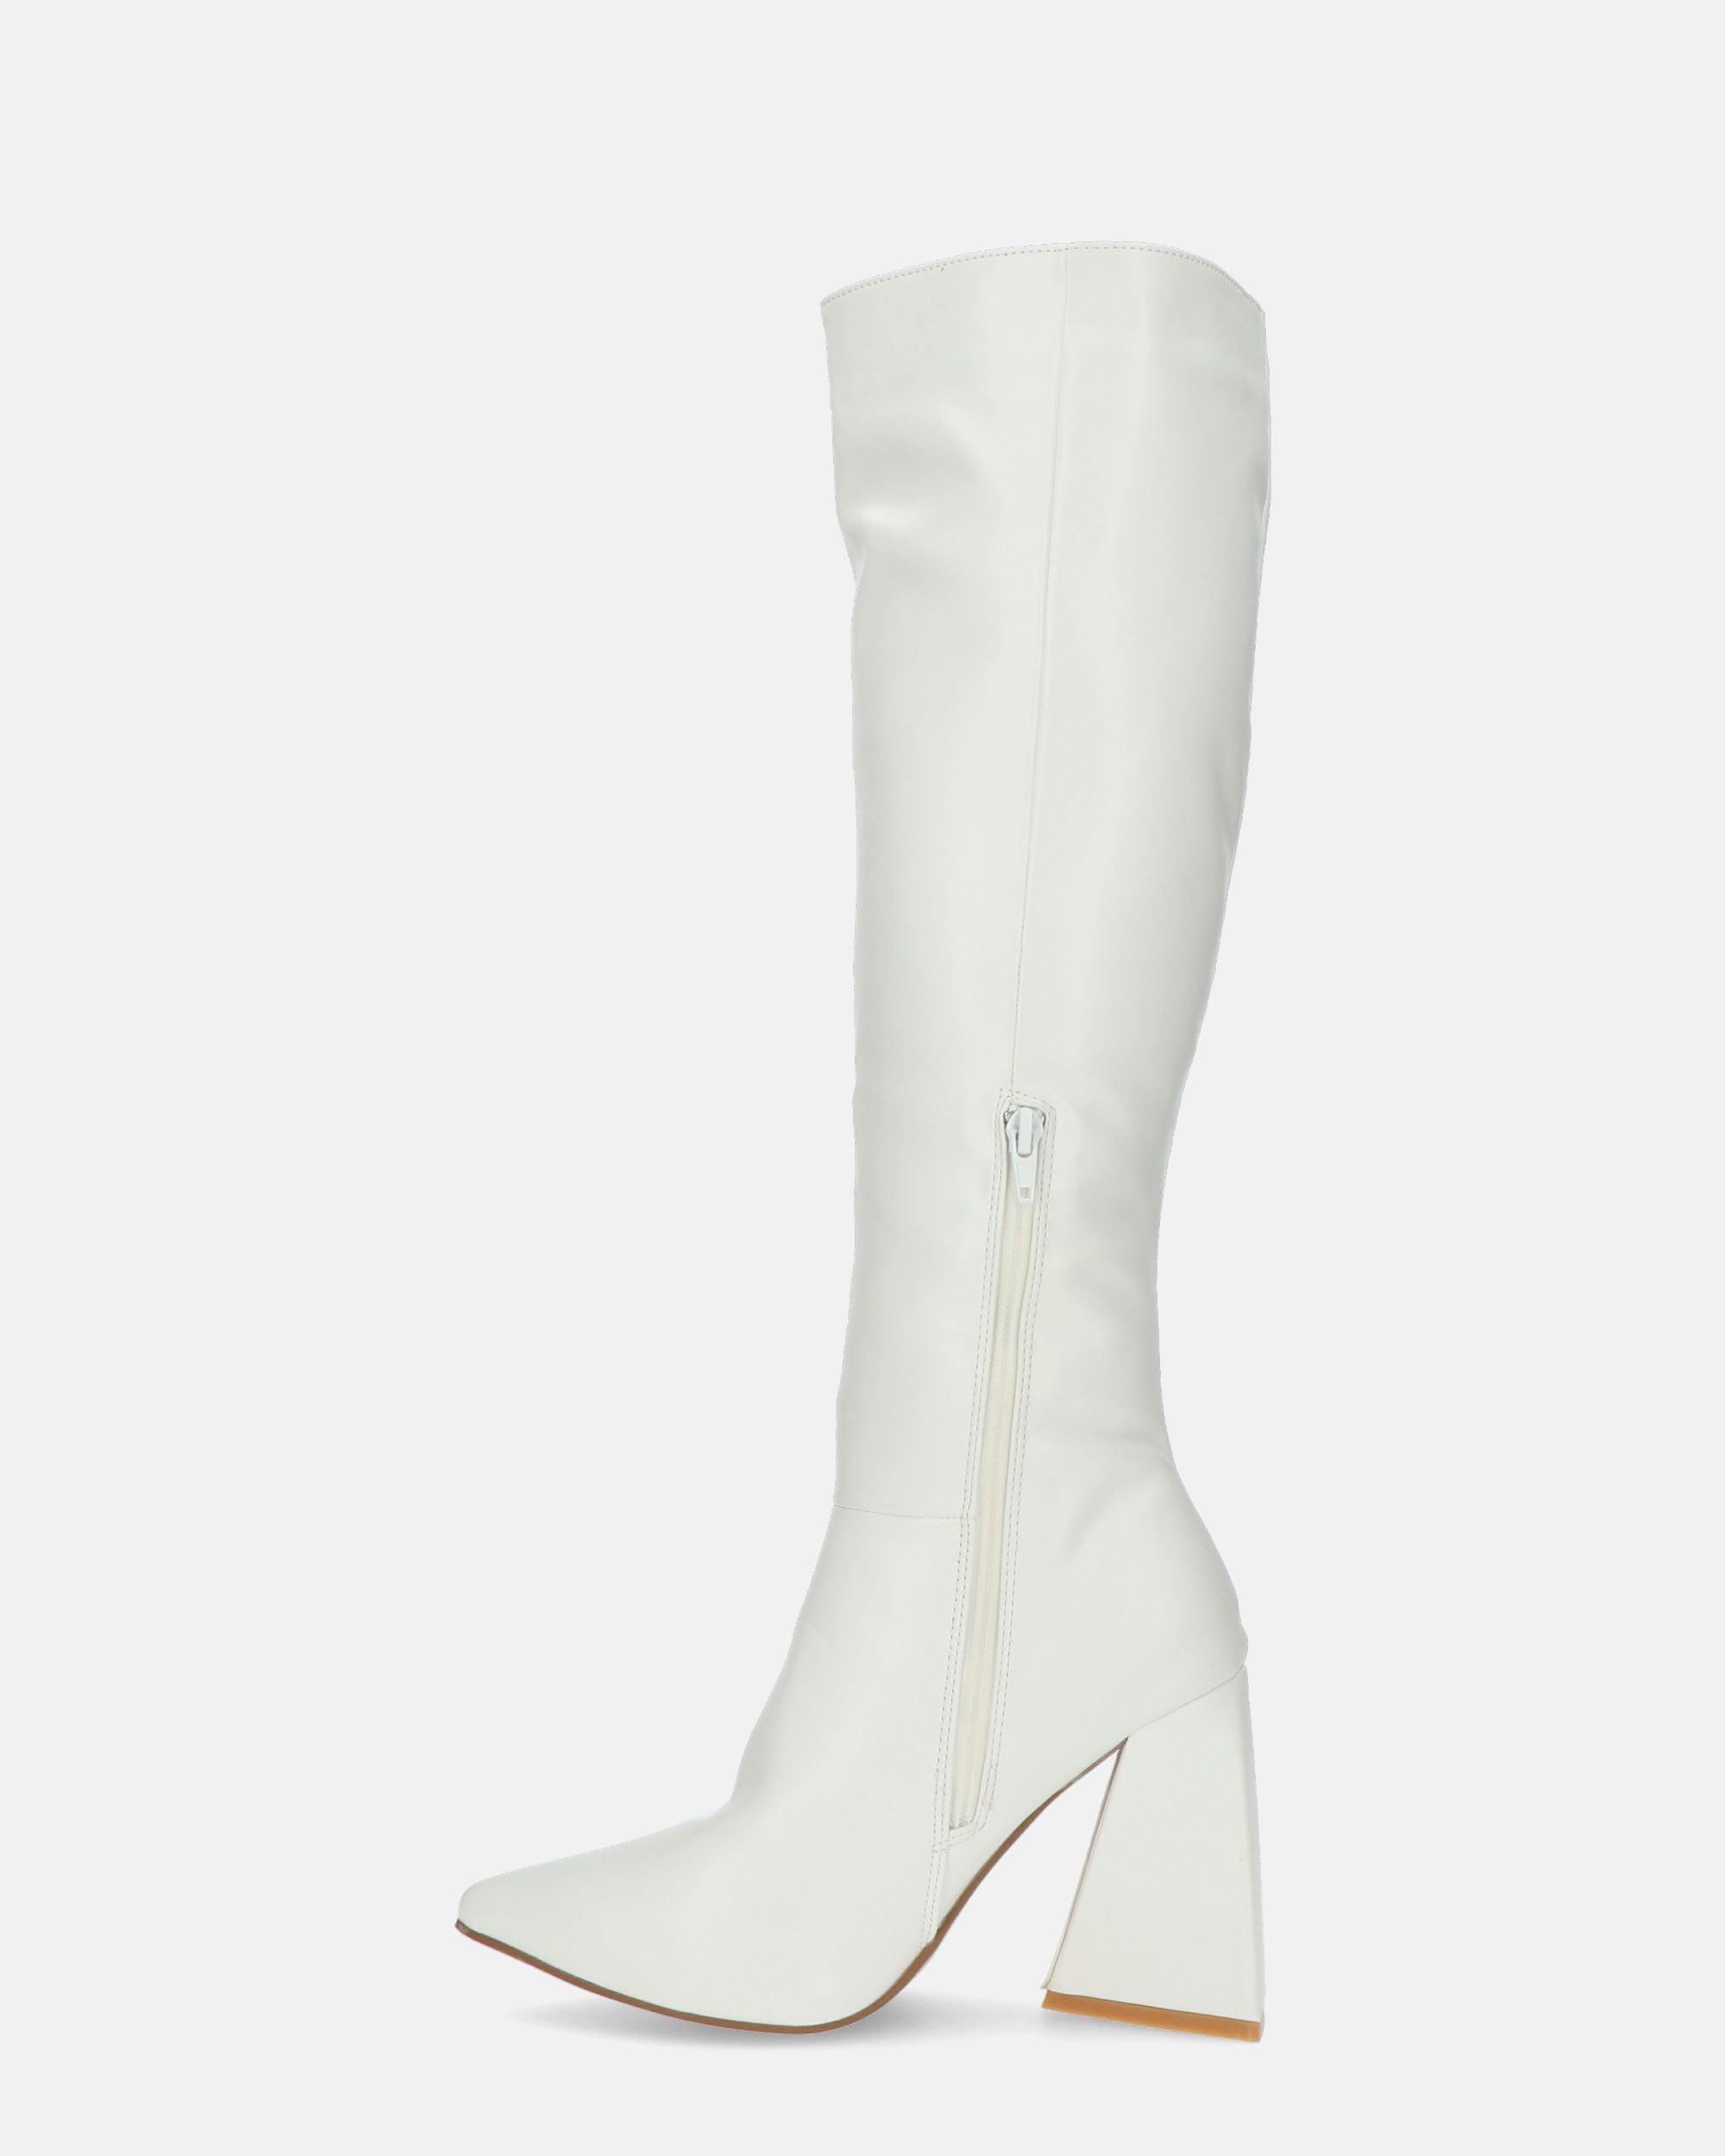 TRUDY - high-heeled boots in white PU